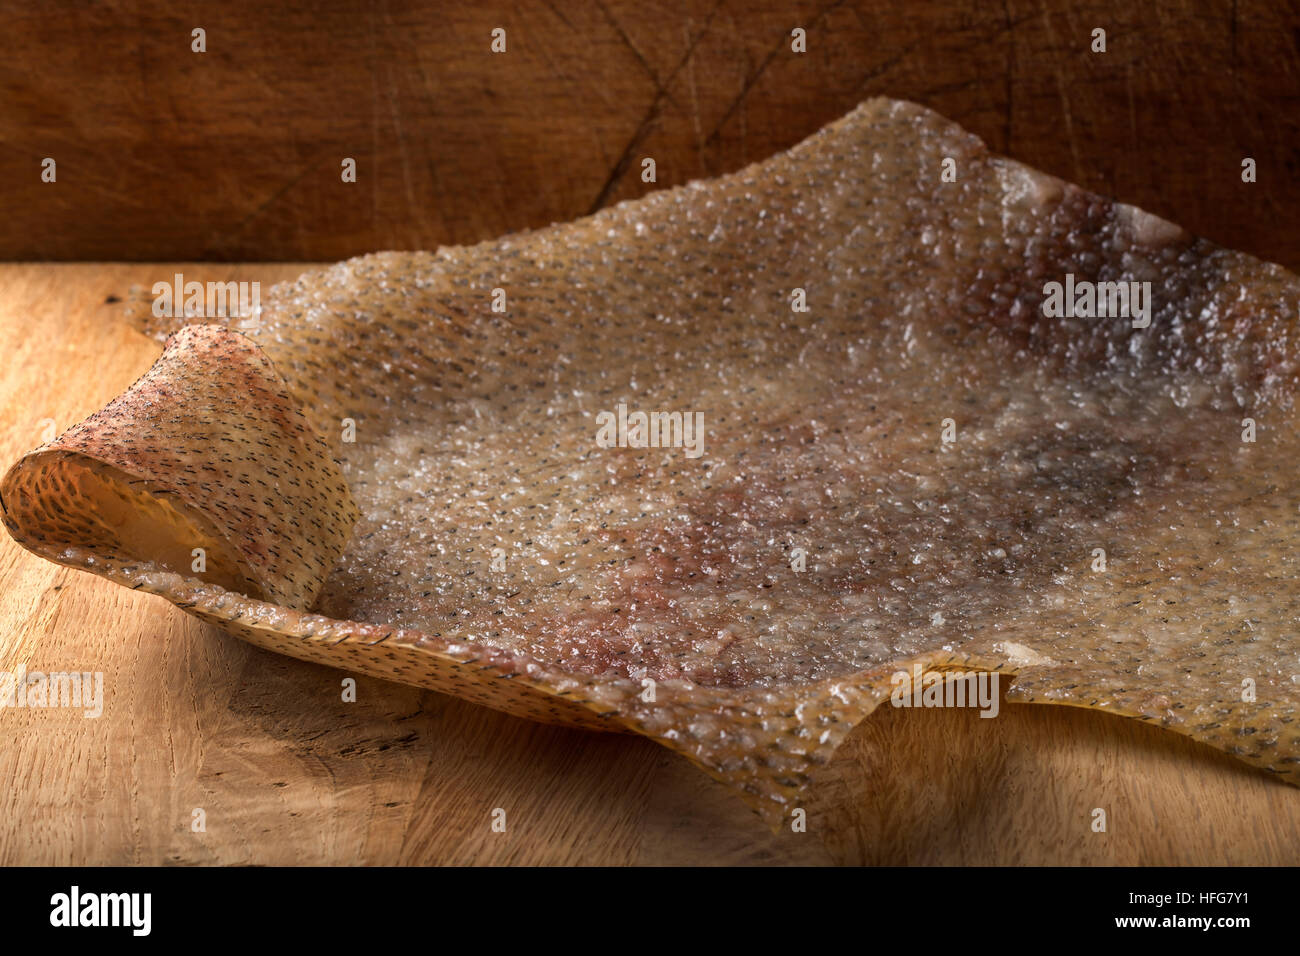 Close up of smoked pork skin (Romanian traditional food - soric) on a wooden background Stock Photo